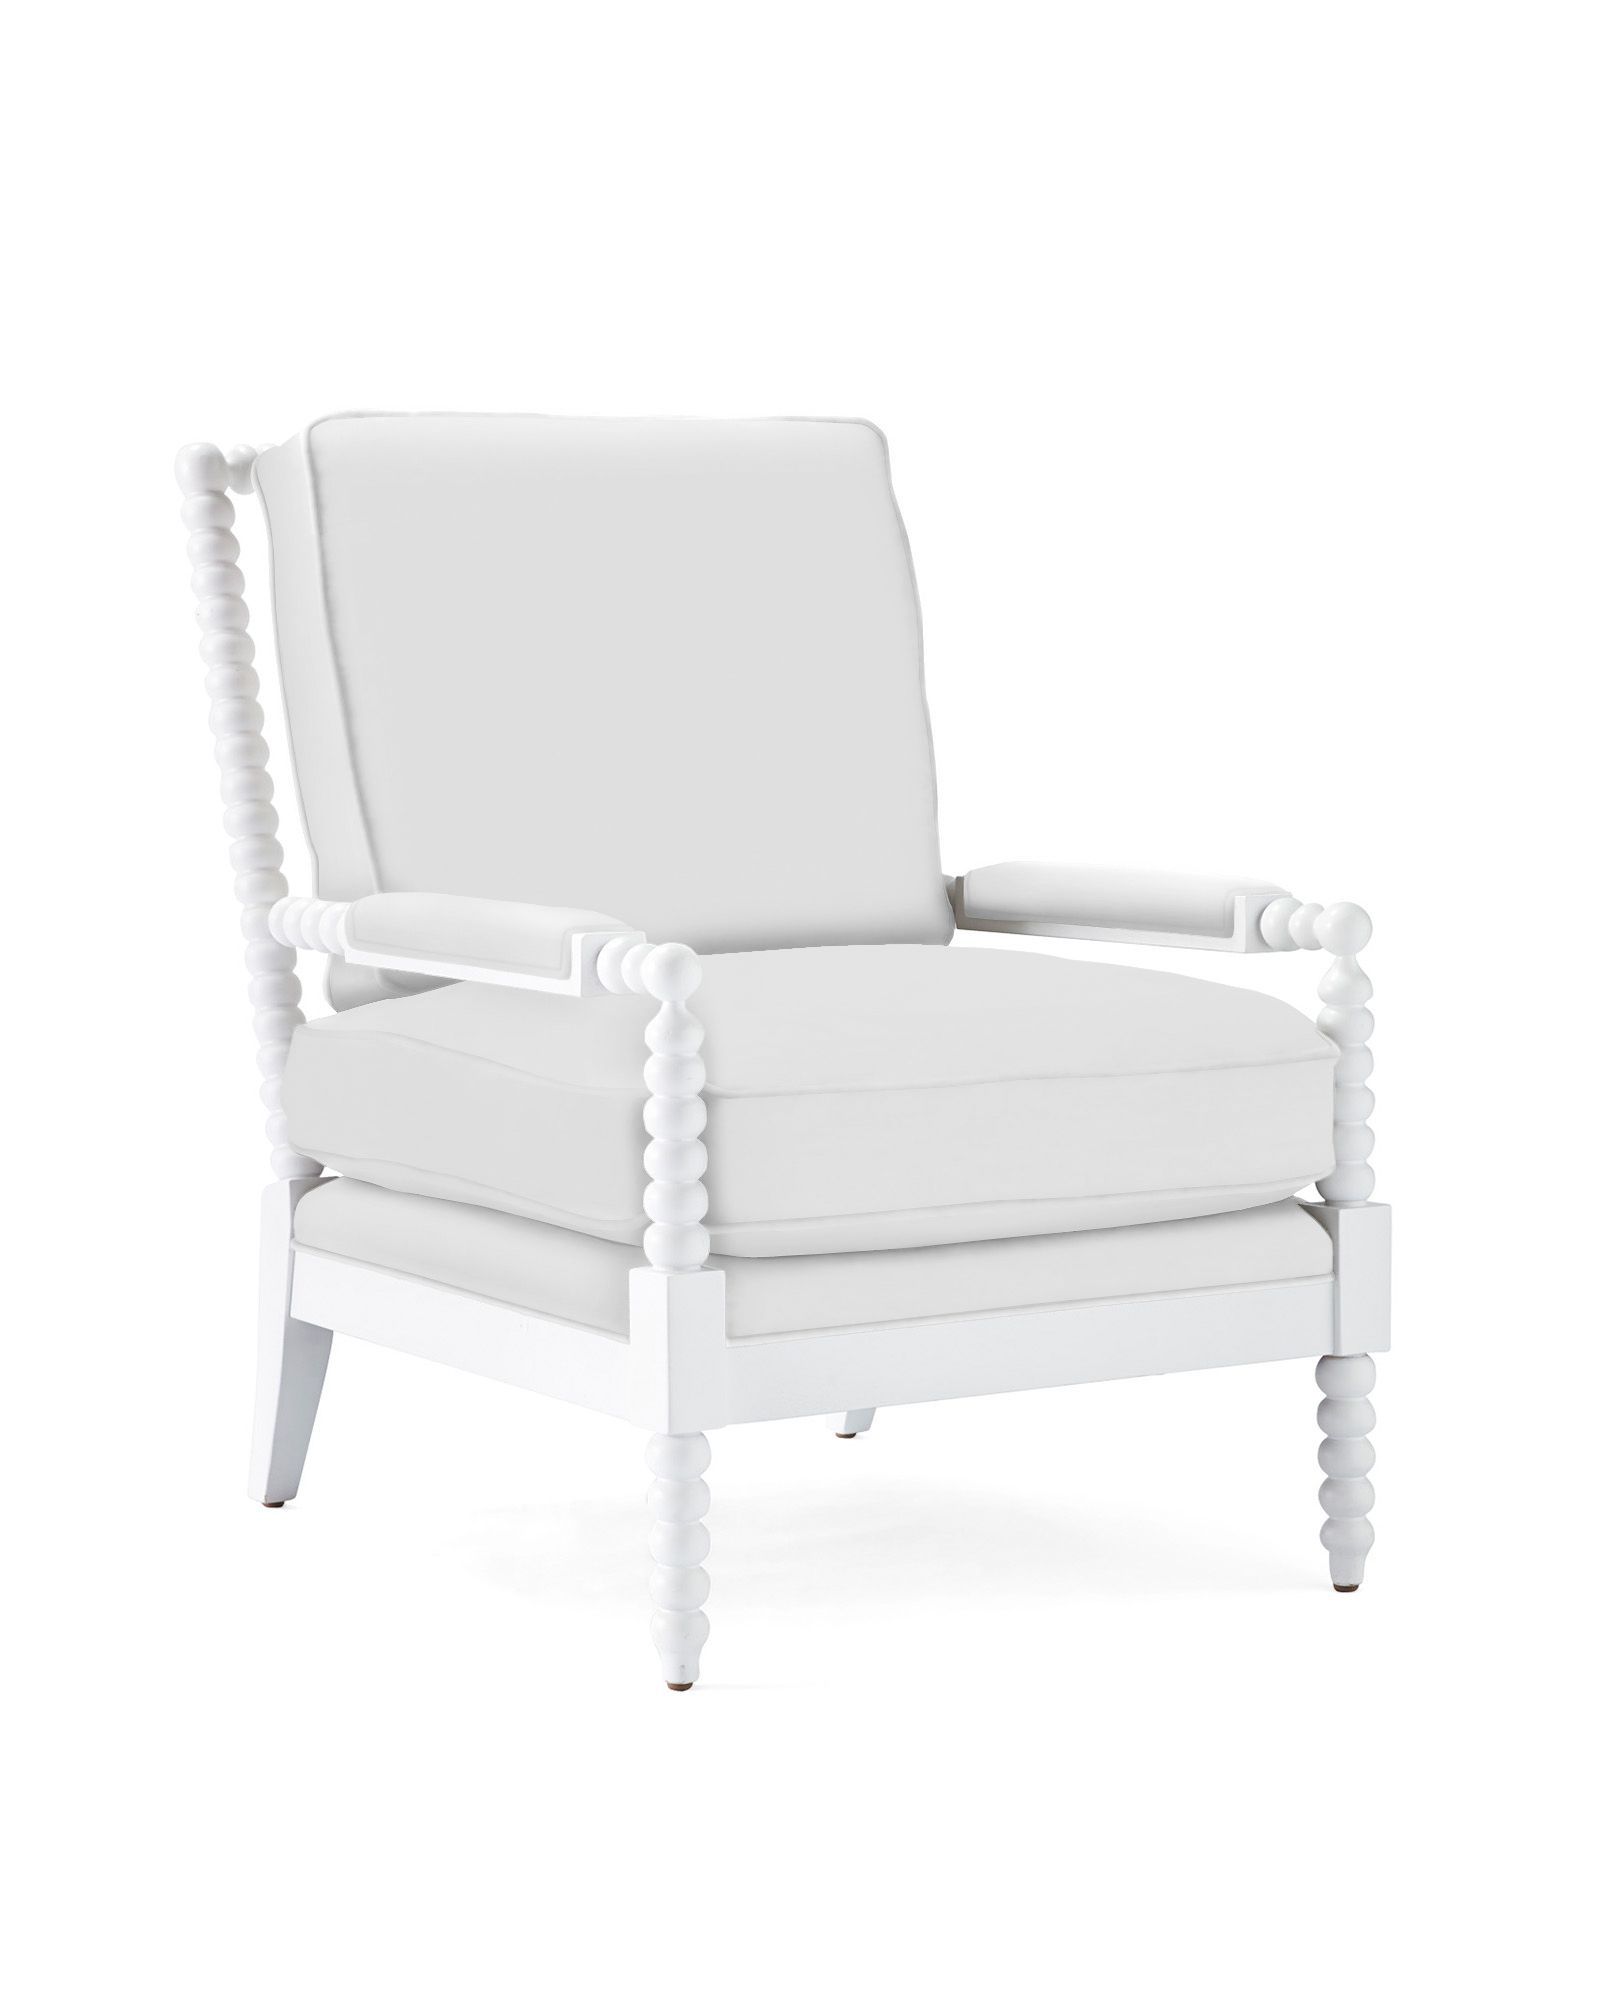 Beckett Chair - White | Serena and Lily